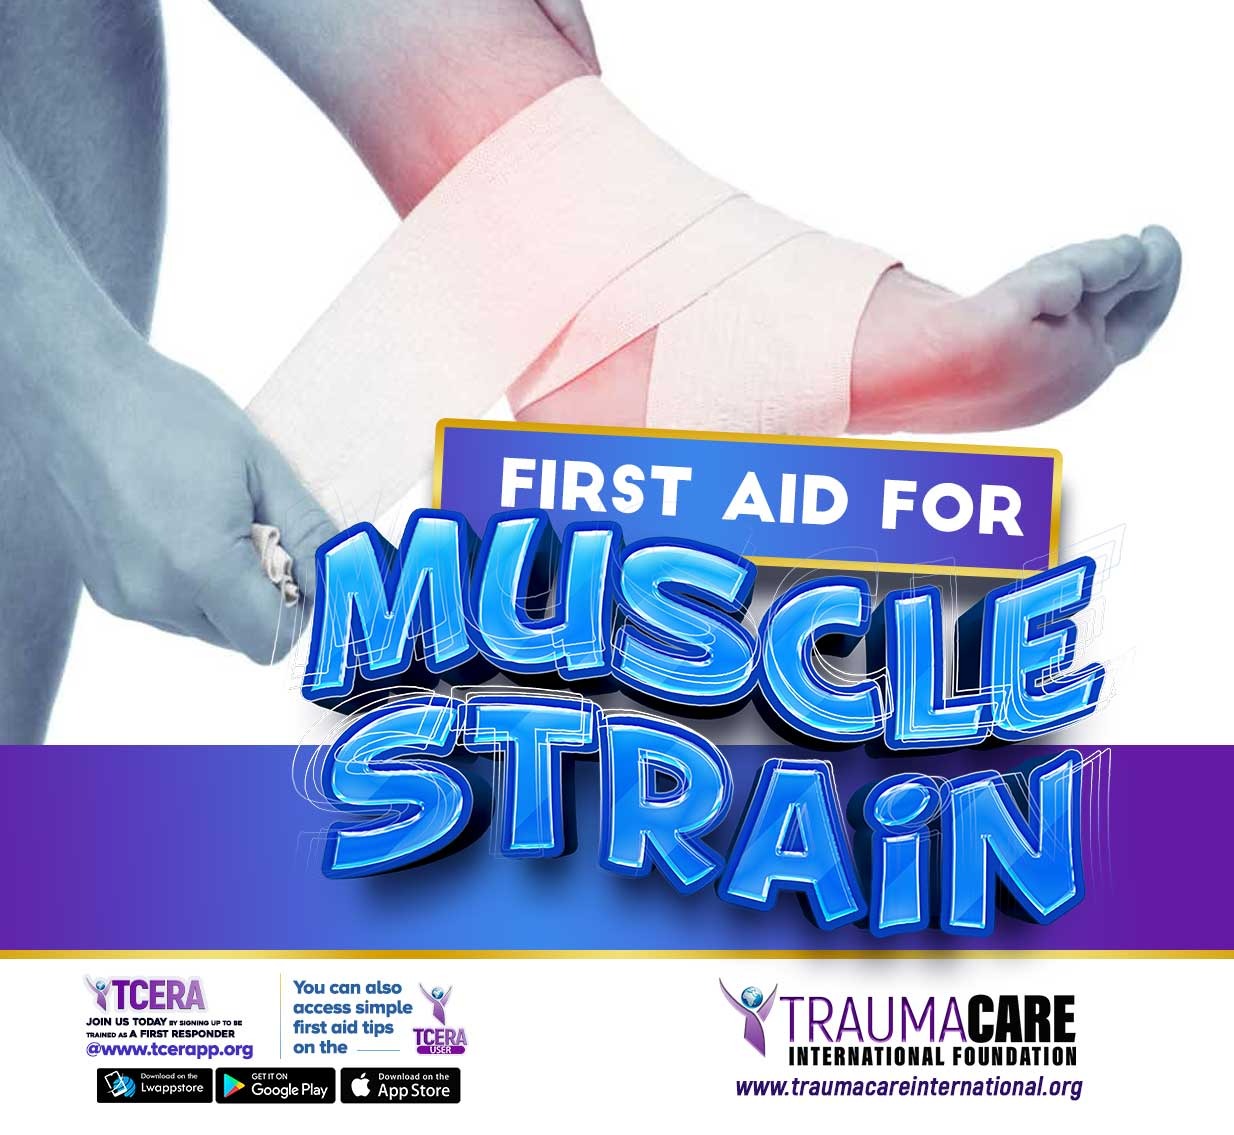 FIRST AID FOR MUSCLE STRAIN